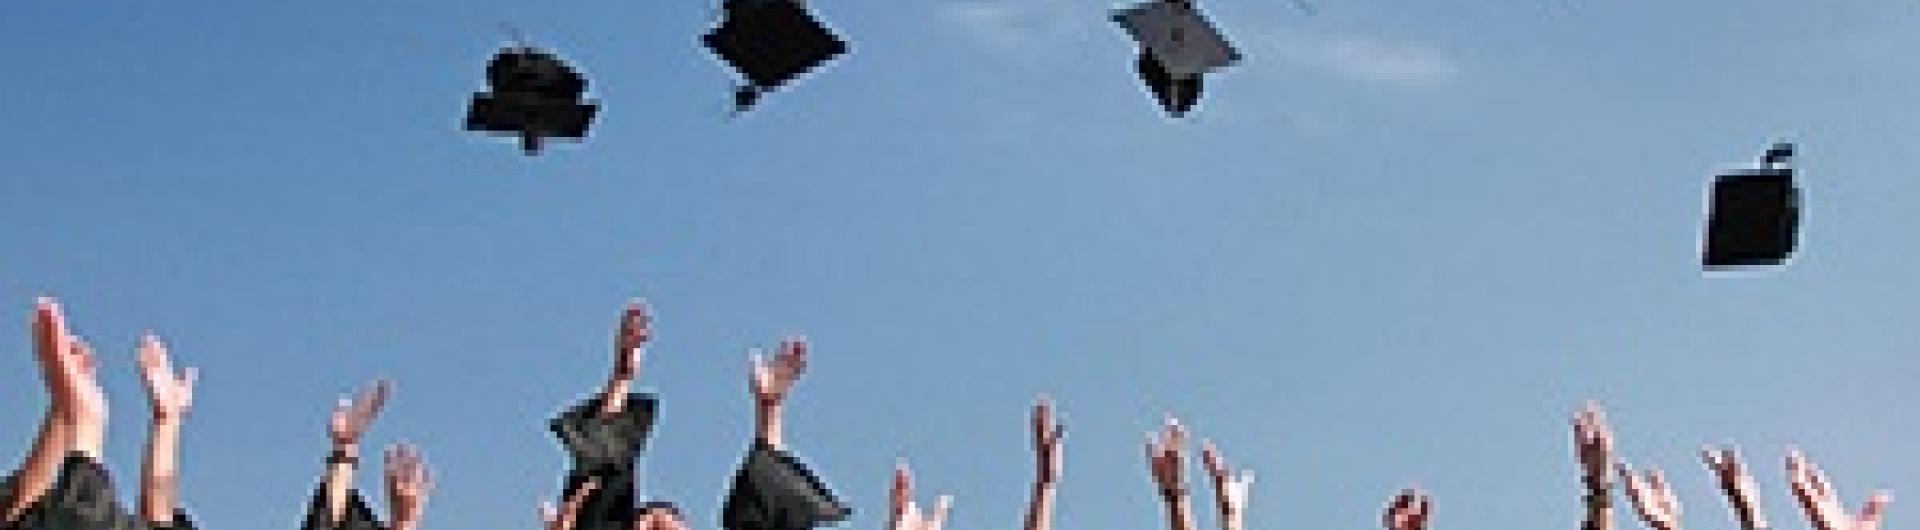 students throwing their graduation caps in the air